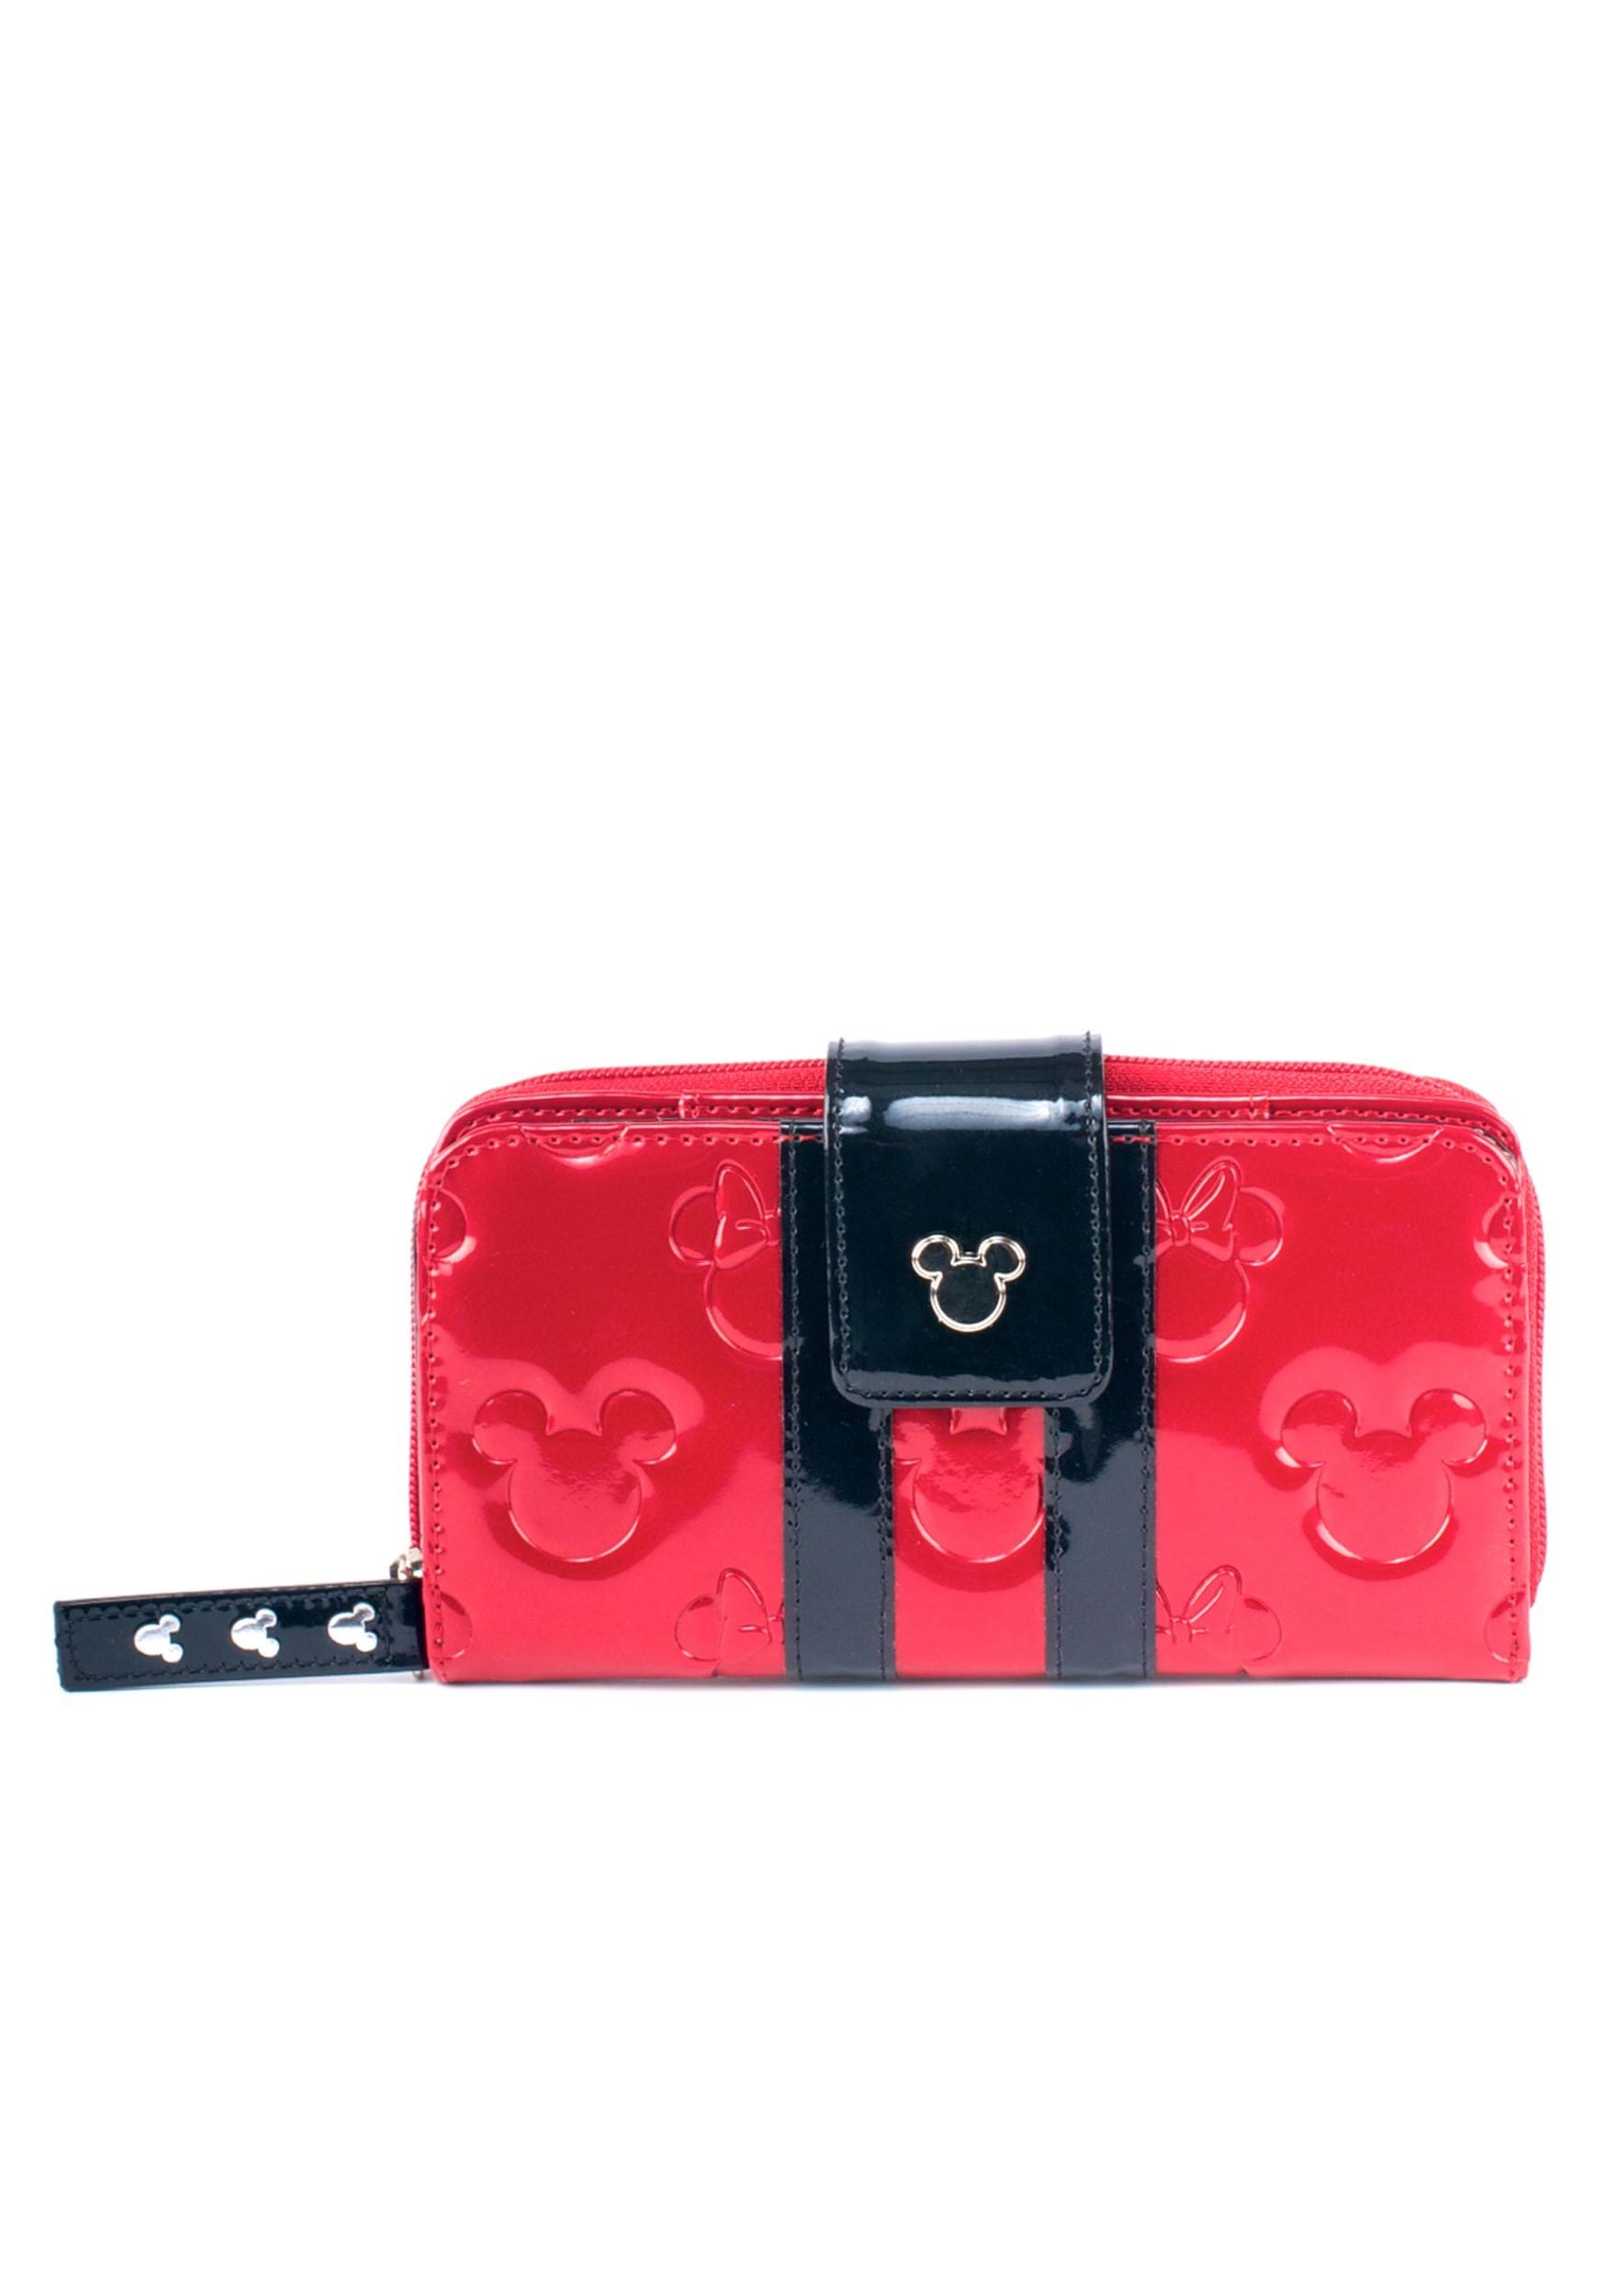 Loungefly Disney Mickey and Minnie Embossed Bag